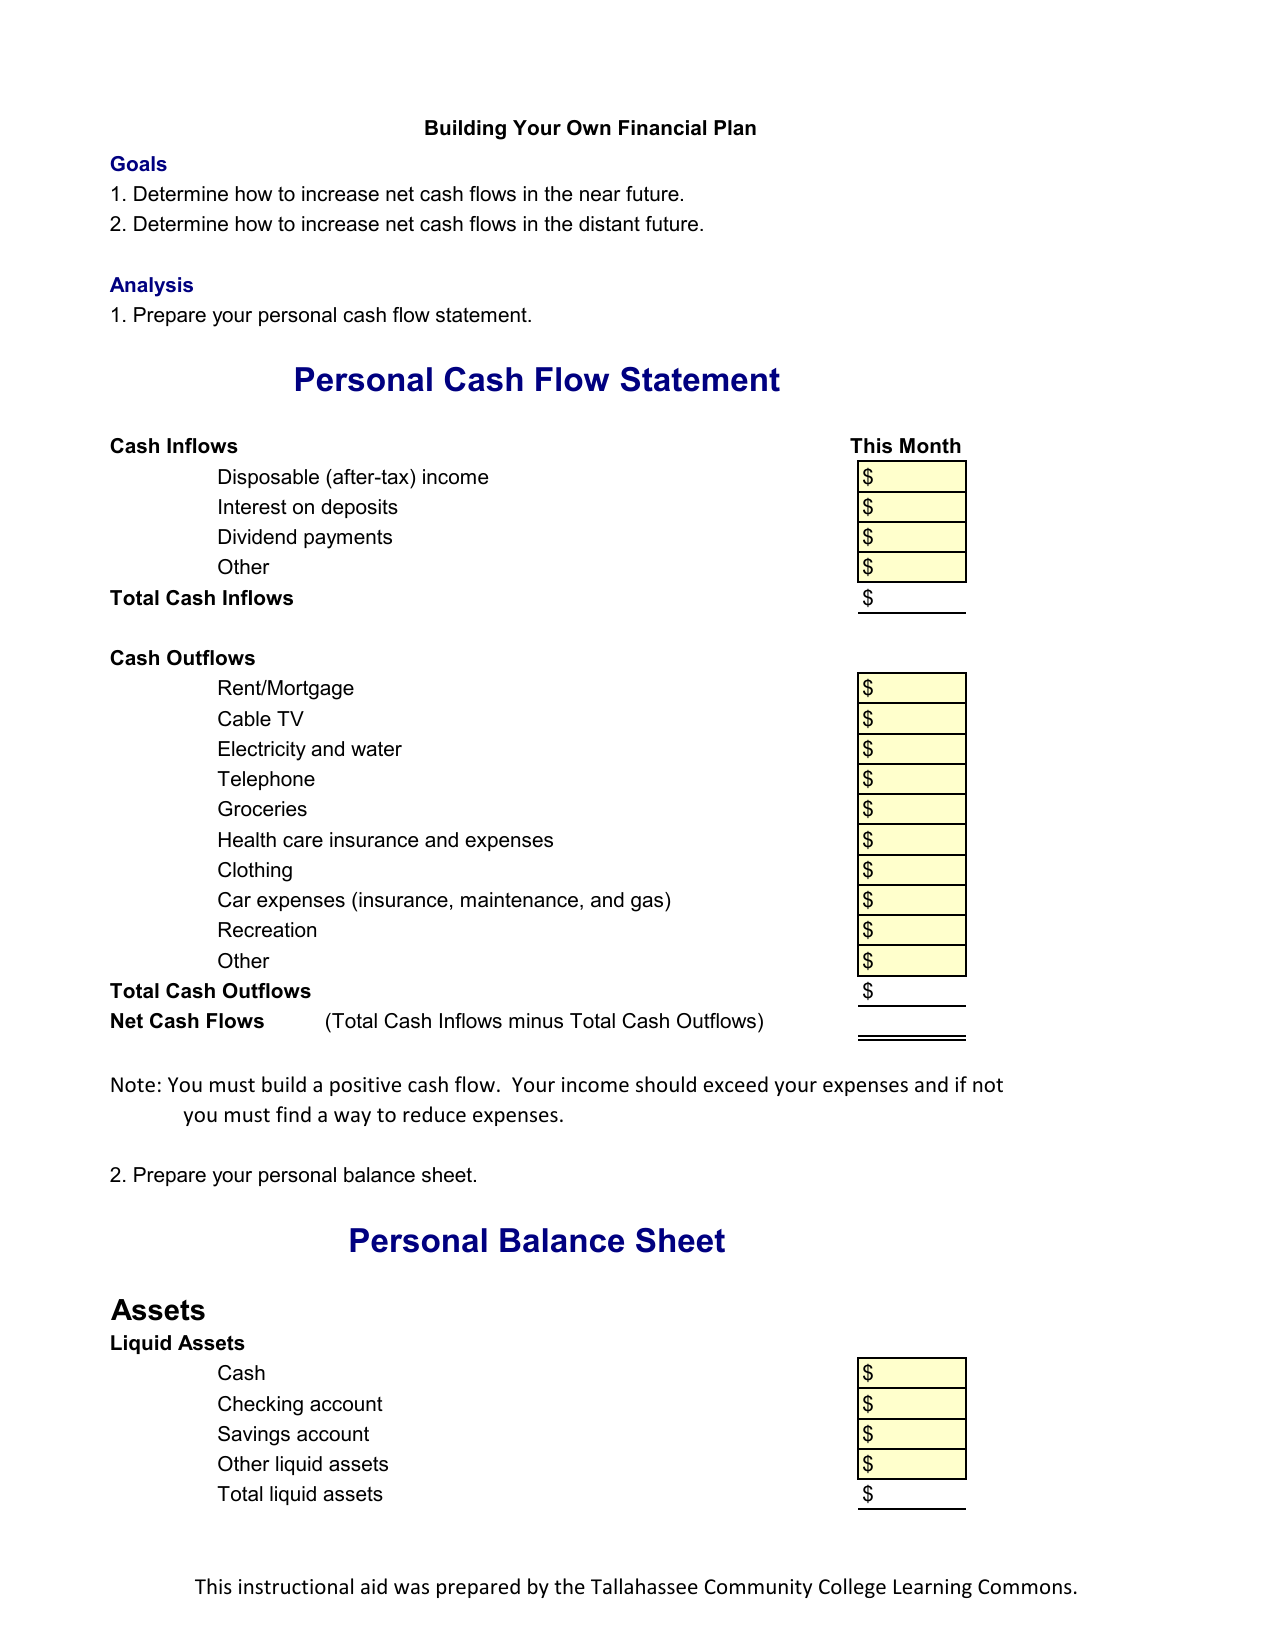 Download Statement and Balance Sheet Template Excel PDF